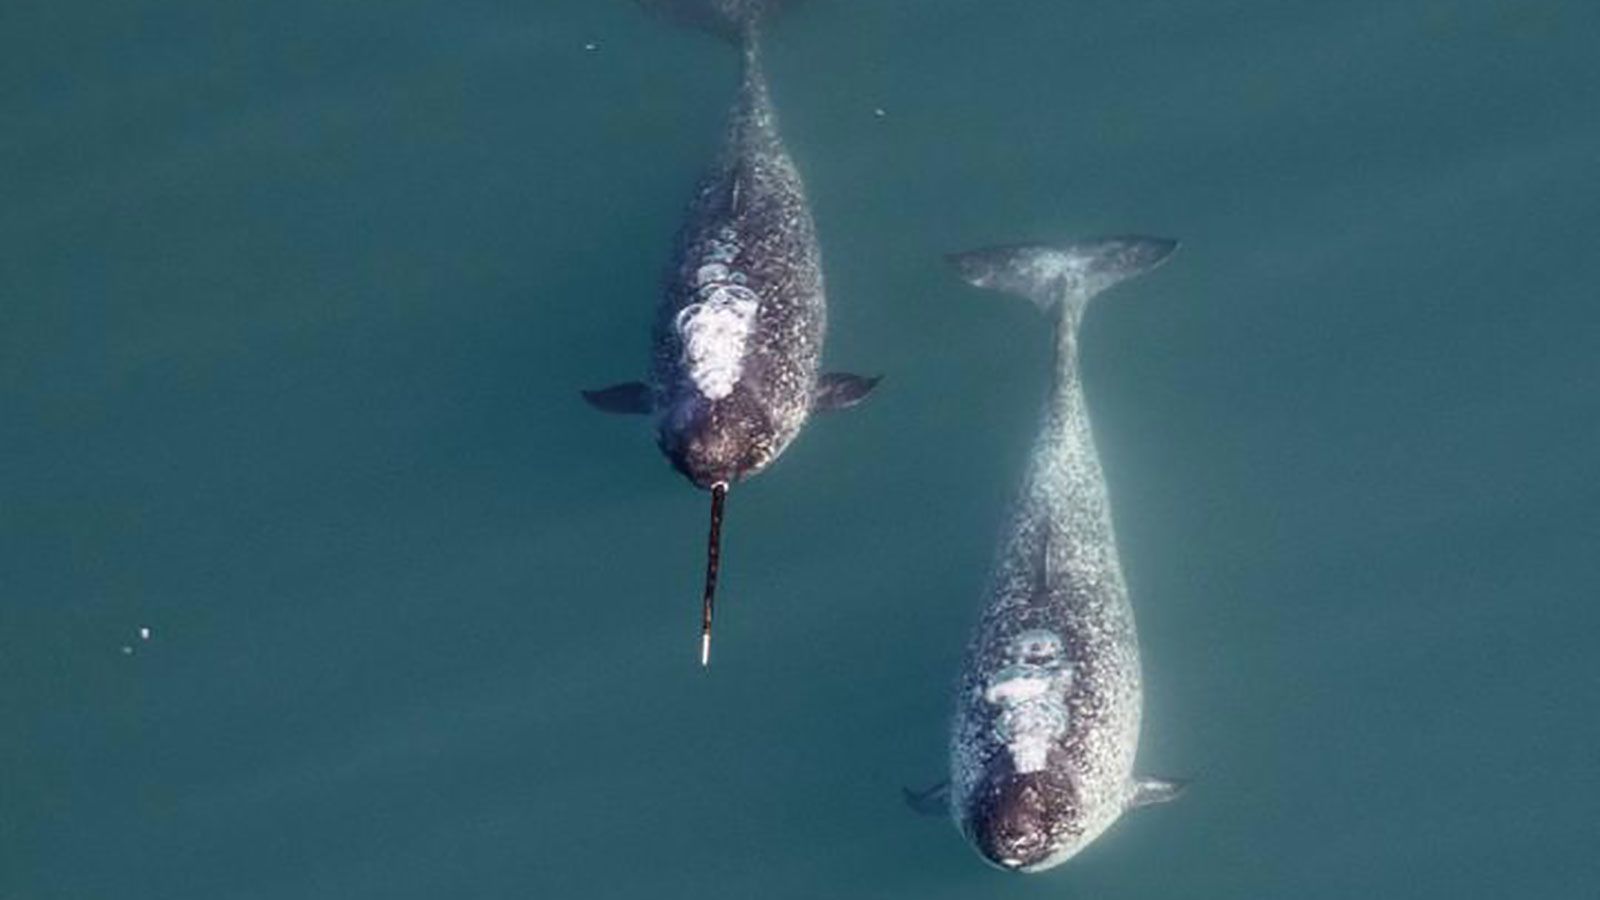 We finally know why narwals have tusks (Hint: It has to do with sex) | CNN